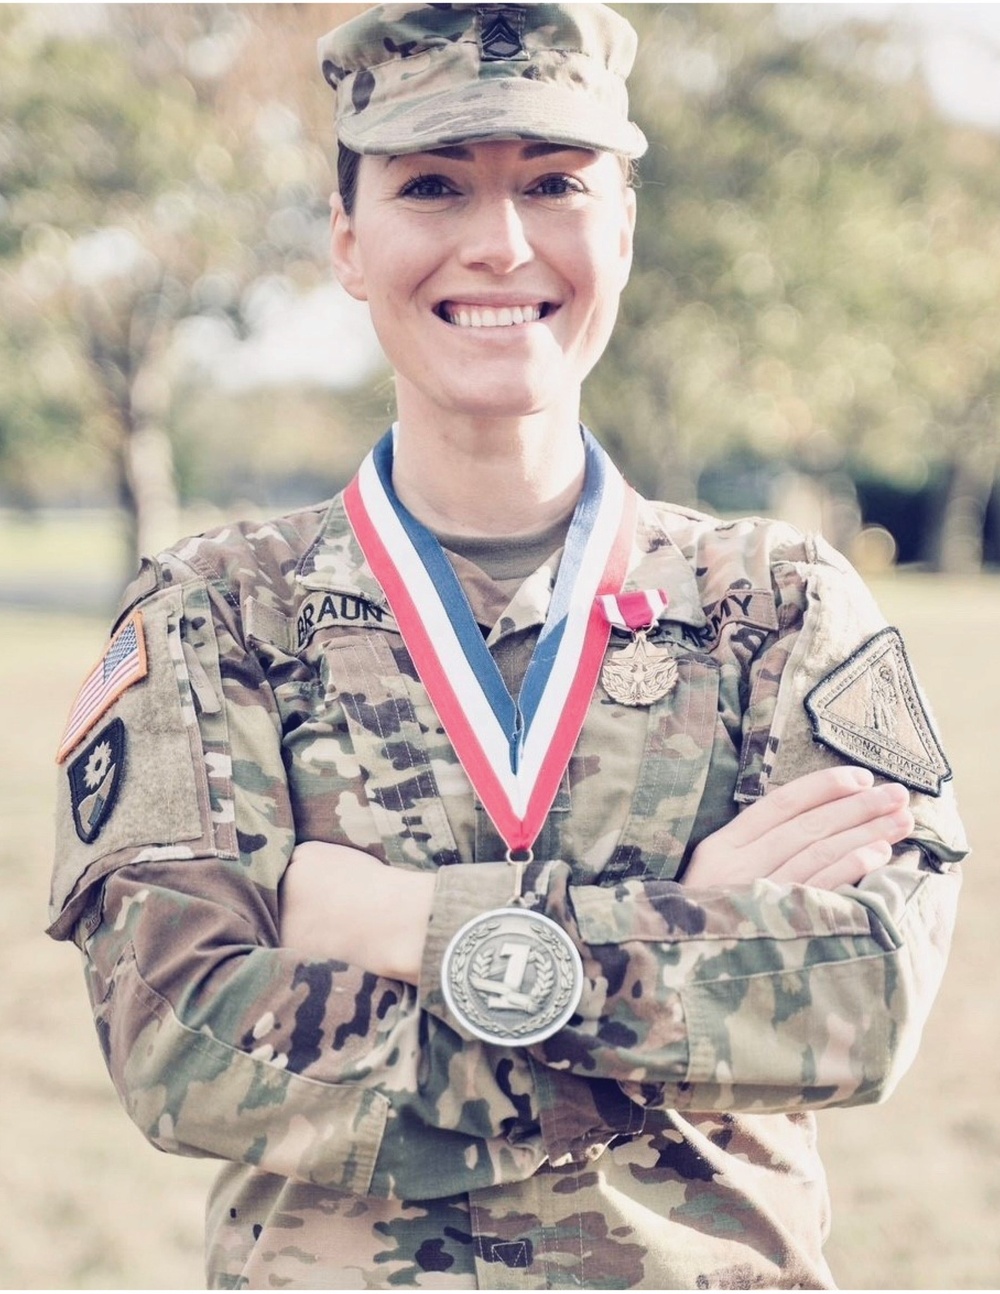 Guard member shares her educational journey